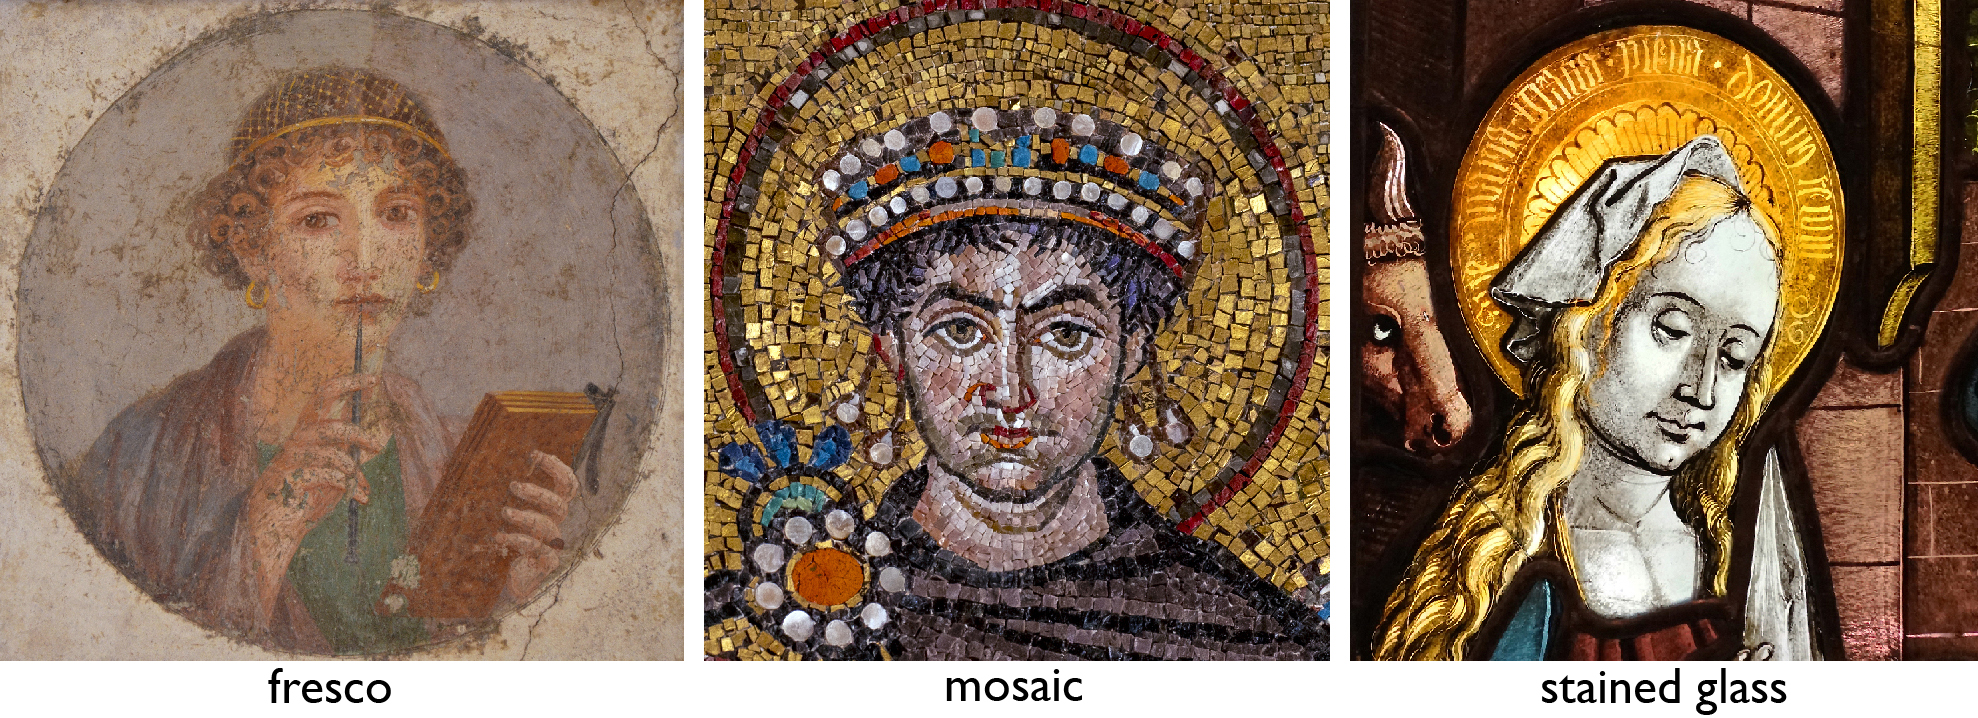 Left: Woman with wax tablets and stylus, c. 50 C.E., fresco (National Archaeological Museum, Naples; photo: Meidosensei, CC BY-SA 2.0); center: Justinian (detail), Justinian and Attendants, mosaic, north wall of the apse, San Vitale, Ravenna, Italy, c. 547 (photo: Steven Zucker, CC BY-NC-SA 2.0); right: Circle of Peter Hemmel von Andlau (Strassburger Werkstattgemeinschaft), Adoration of the Magi (detail), 1507, Munich, Germany, pot metal and colorless glass, vitreous paint, and silver stain, 72.4 x 45.7 cm (Cloisters, The Metropolitan Museum of Art; photo: Steven Zucker, CC BY-NC-SA 2.0)